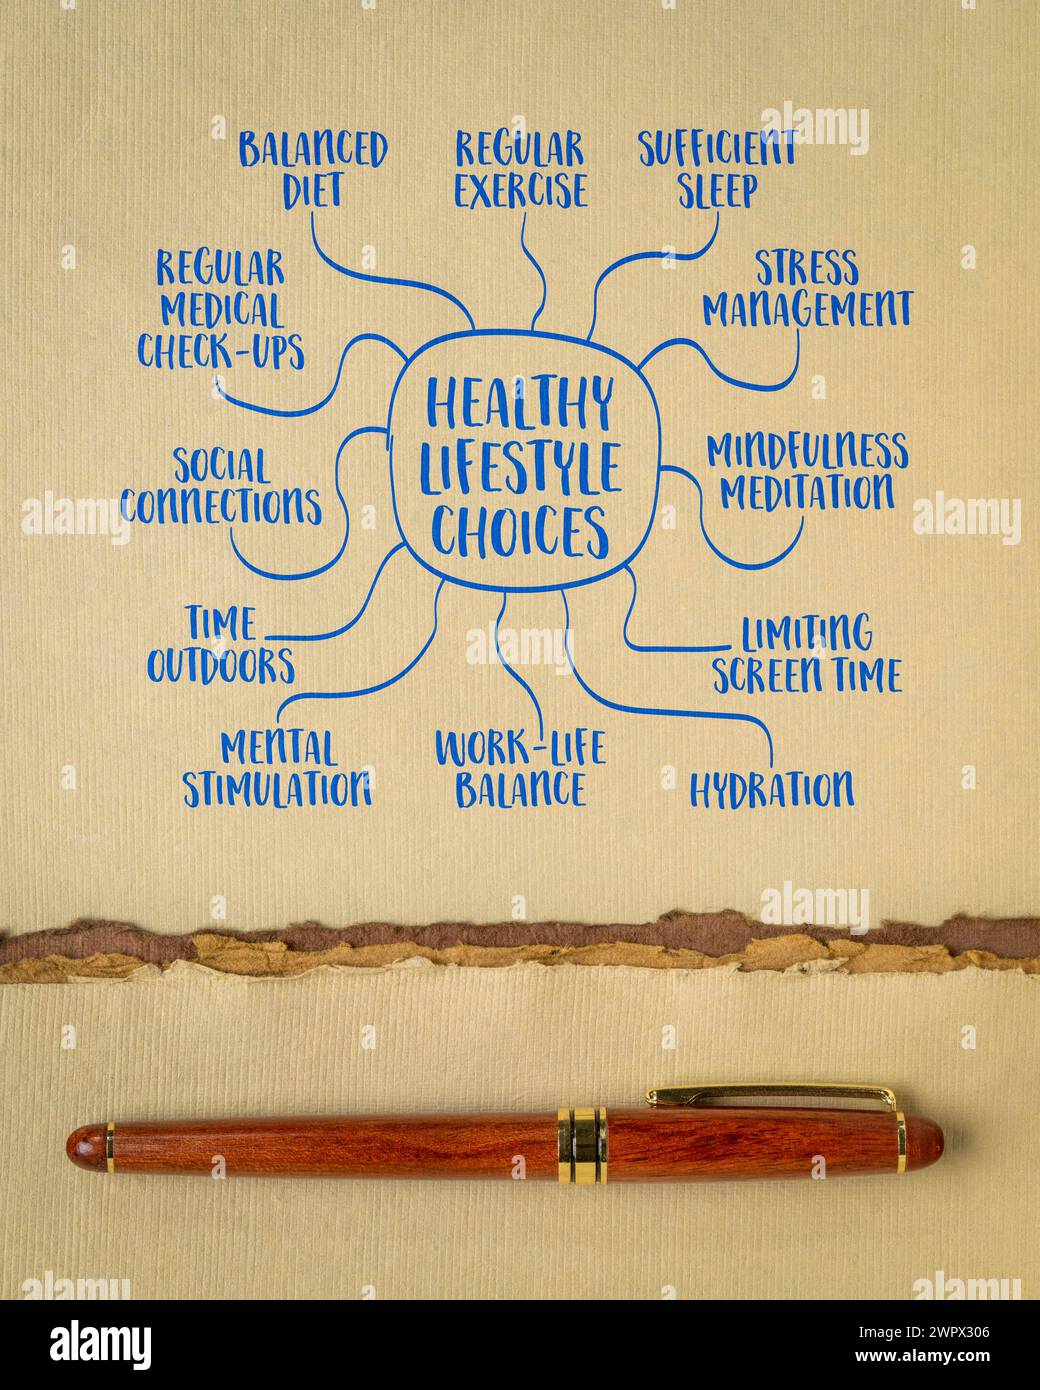 examples of healthy lifestyle choices, mind map infographics, sketch on art paper Stock Photo